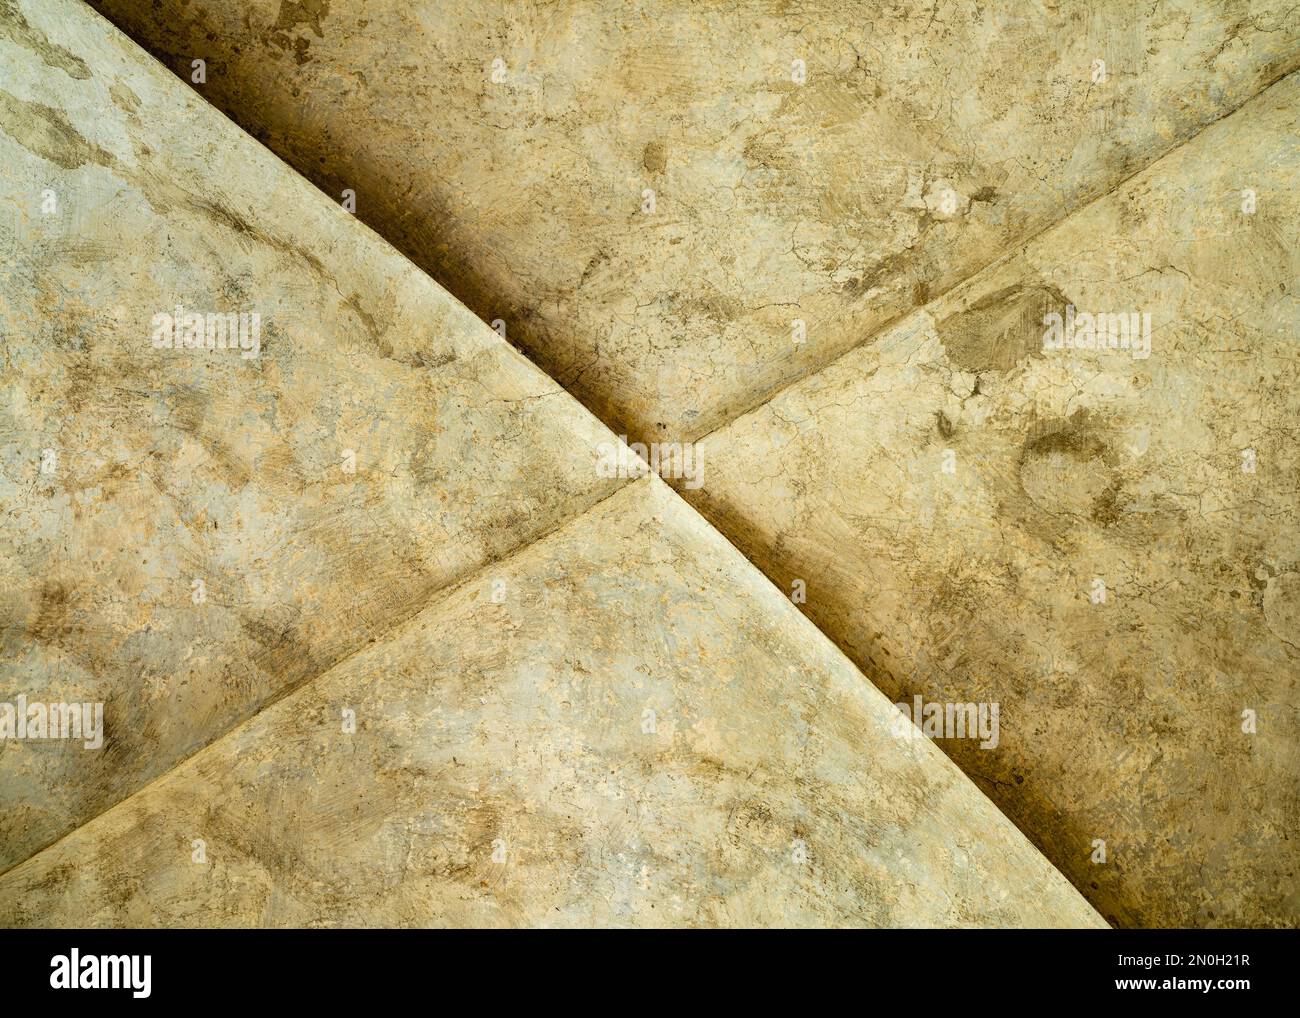 Rustic looking apex of a vaulted roof in Tuscany Stock Photo